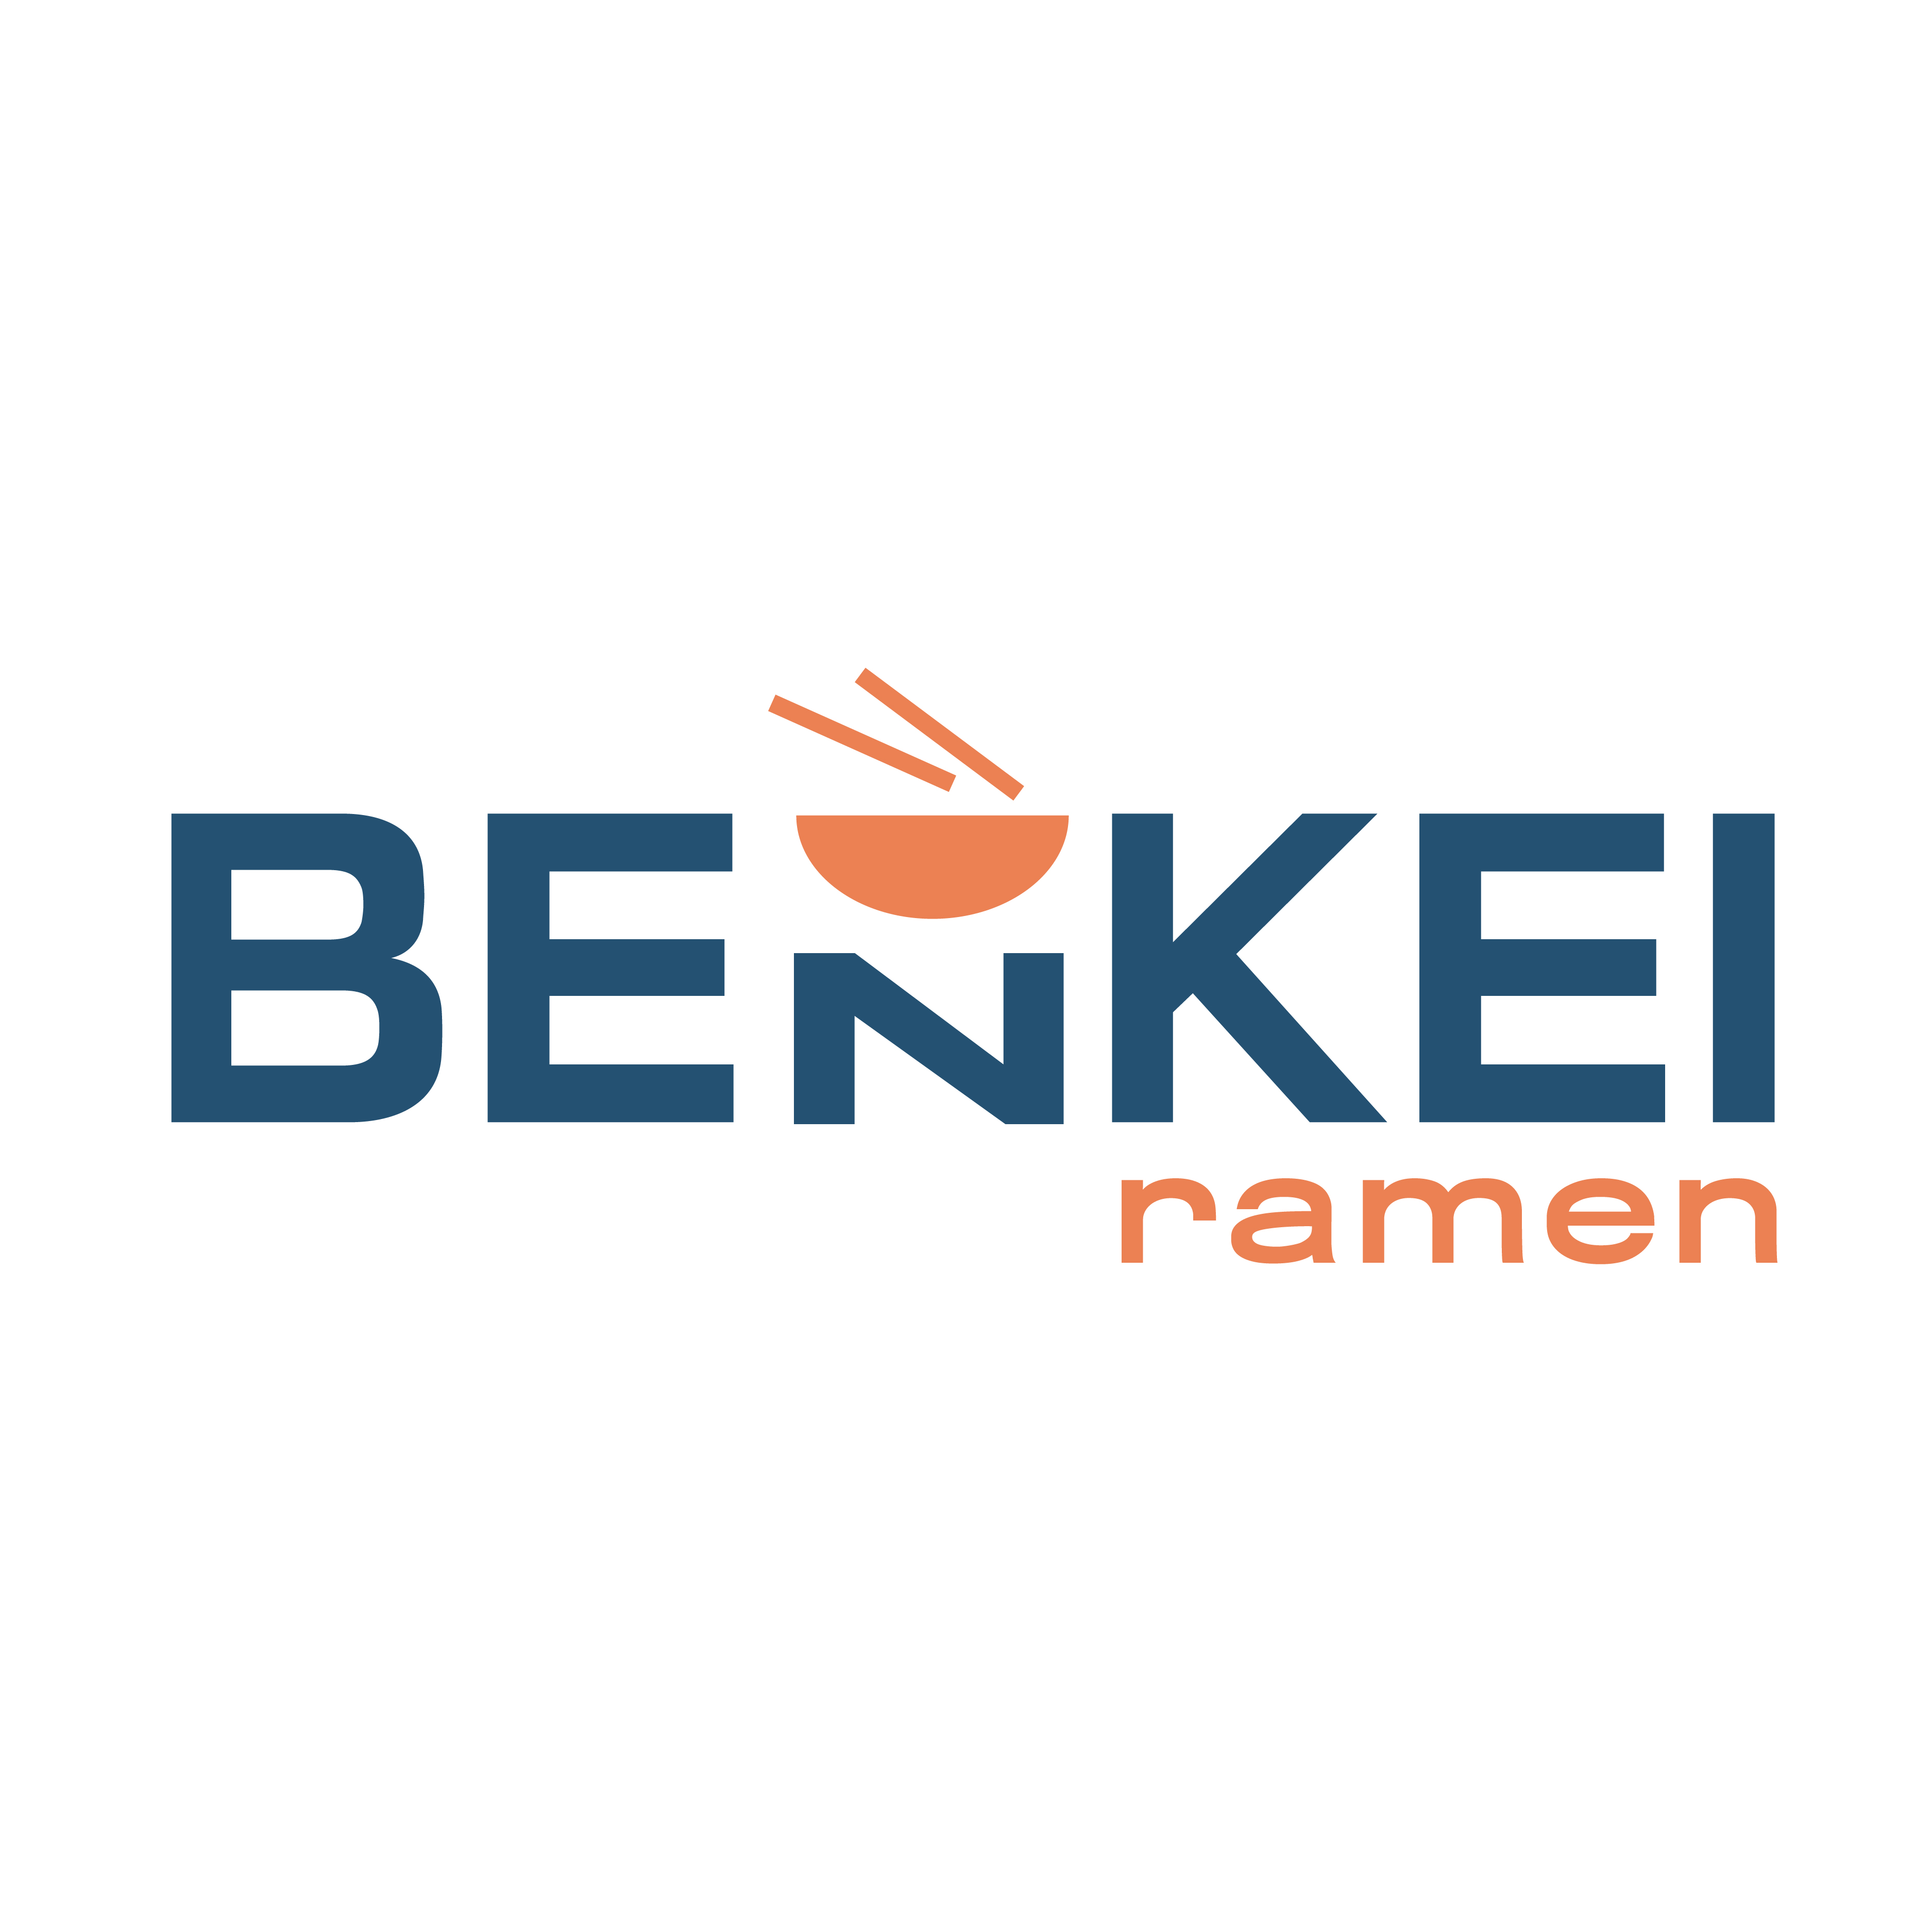 Benkei Ramen Logo logo design by logo designer Rob Wolford for your inspiration and for the worlds largest logo competition